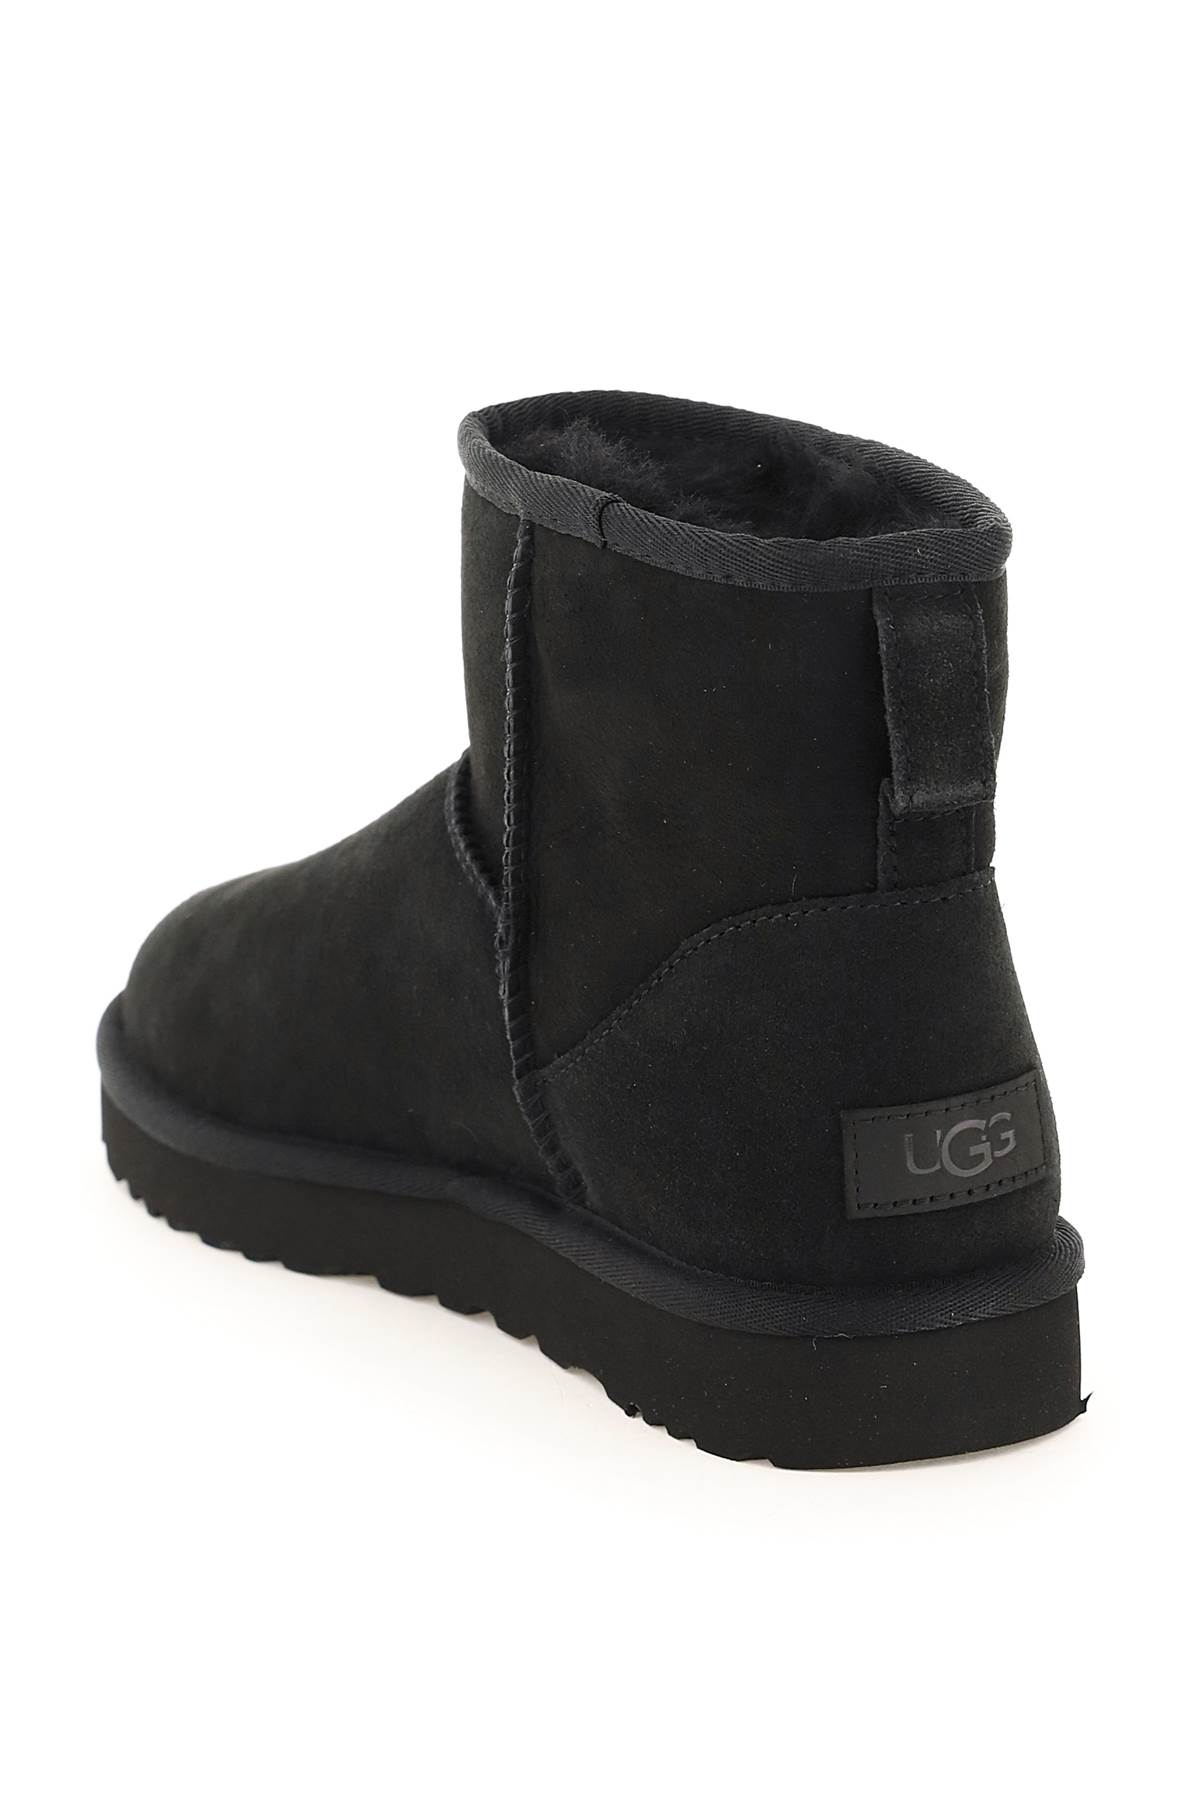 Shop Ugg Classic Mini Ii Ankle Boots In Black